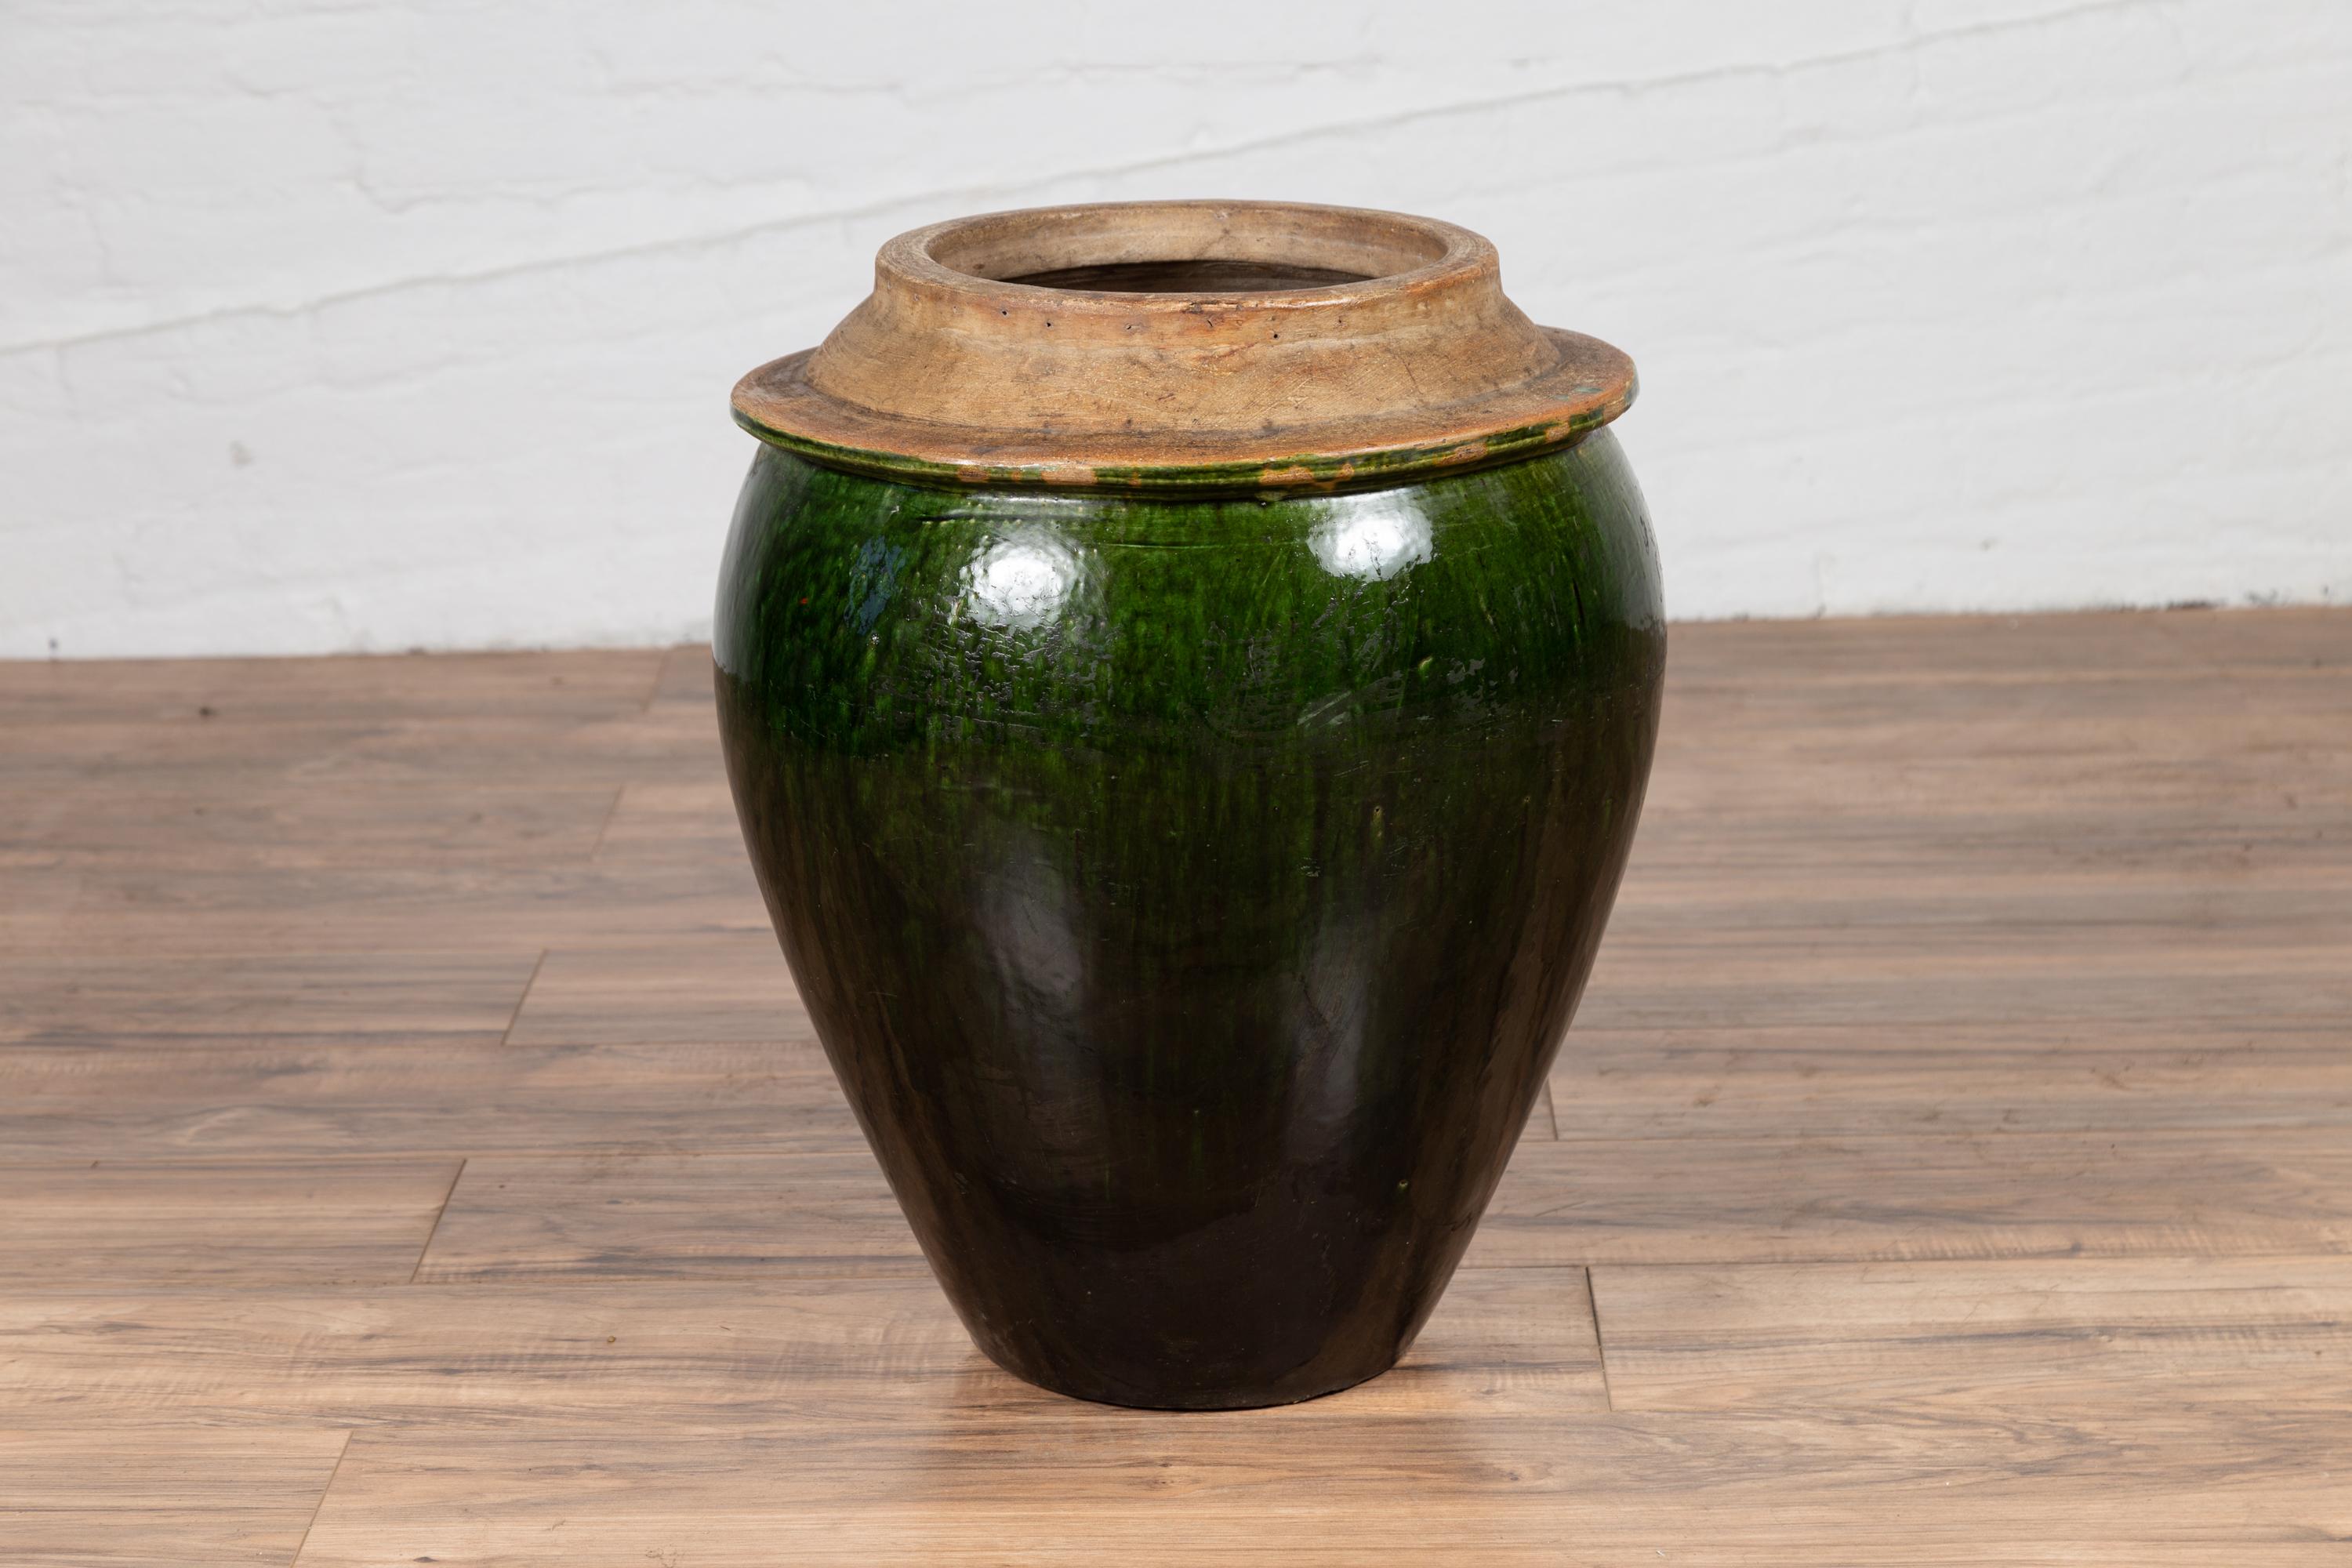 A Chinese contemporary green glazed water jug with unusual design and calligraphy. Born in China, this handsome pottery features a green glazed body, topped by a flaring neck. The belly is adorned with lovely Chinese calligraphy in the front, that